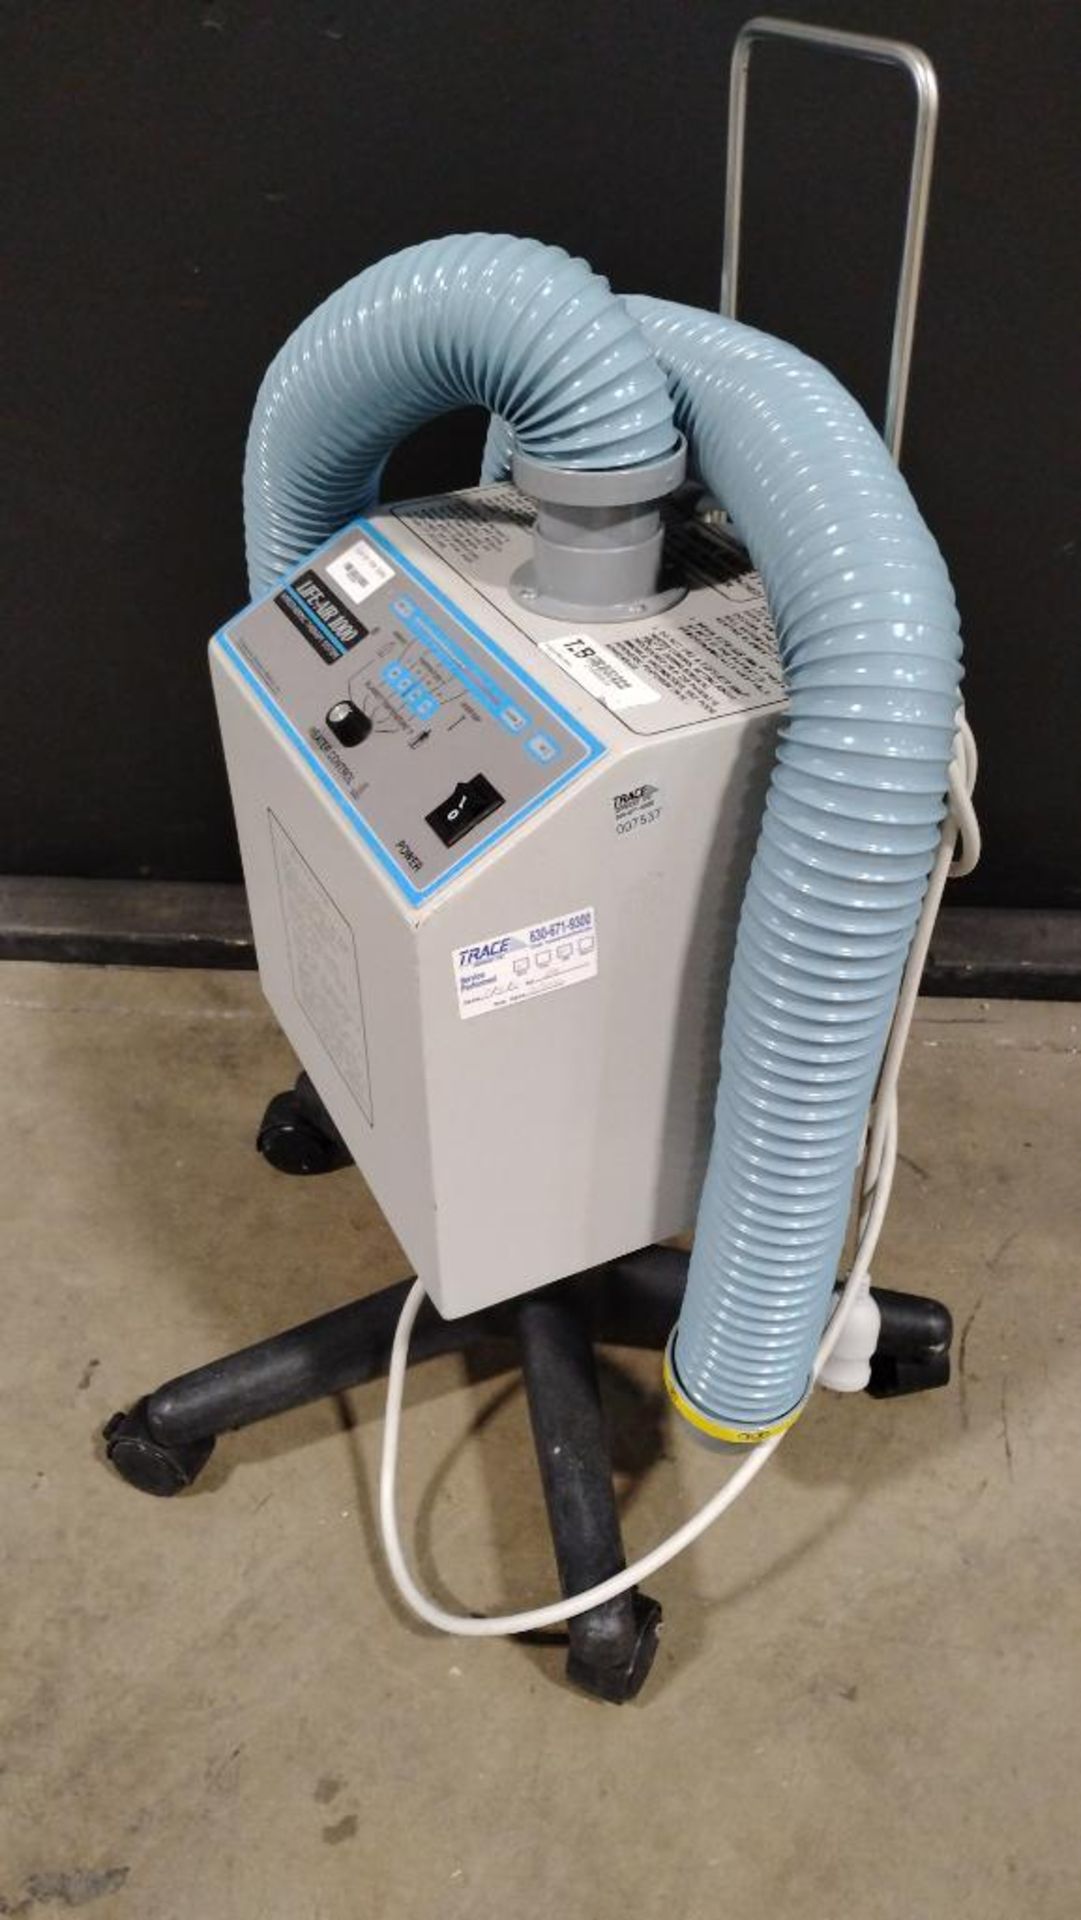 PROGRESSIVE DYNAMICS MEDICAL INC. LIFE-AIR 1000 HYPOTHERMICS THERAPY SYSTEM - Image 2 of 4